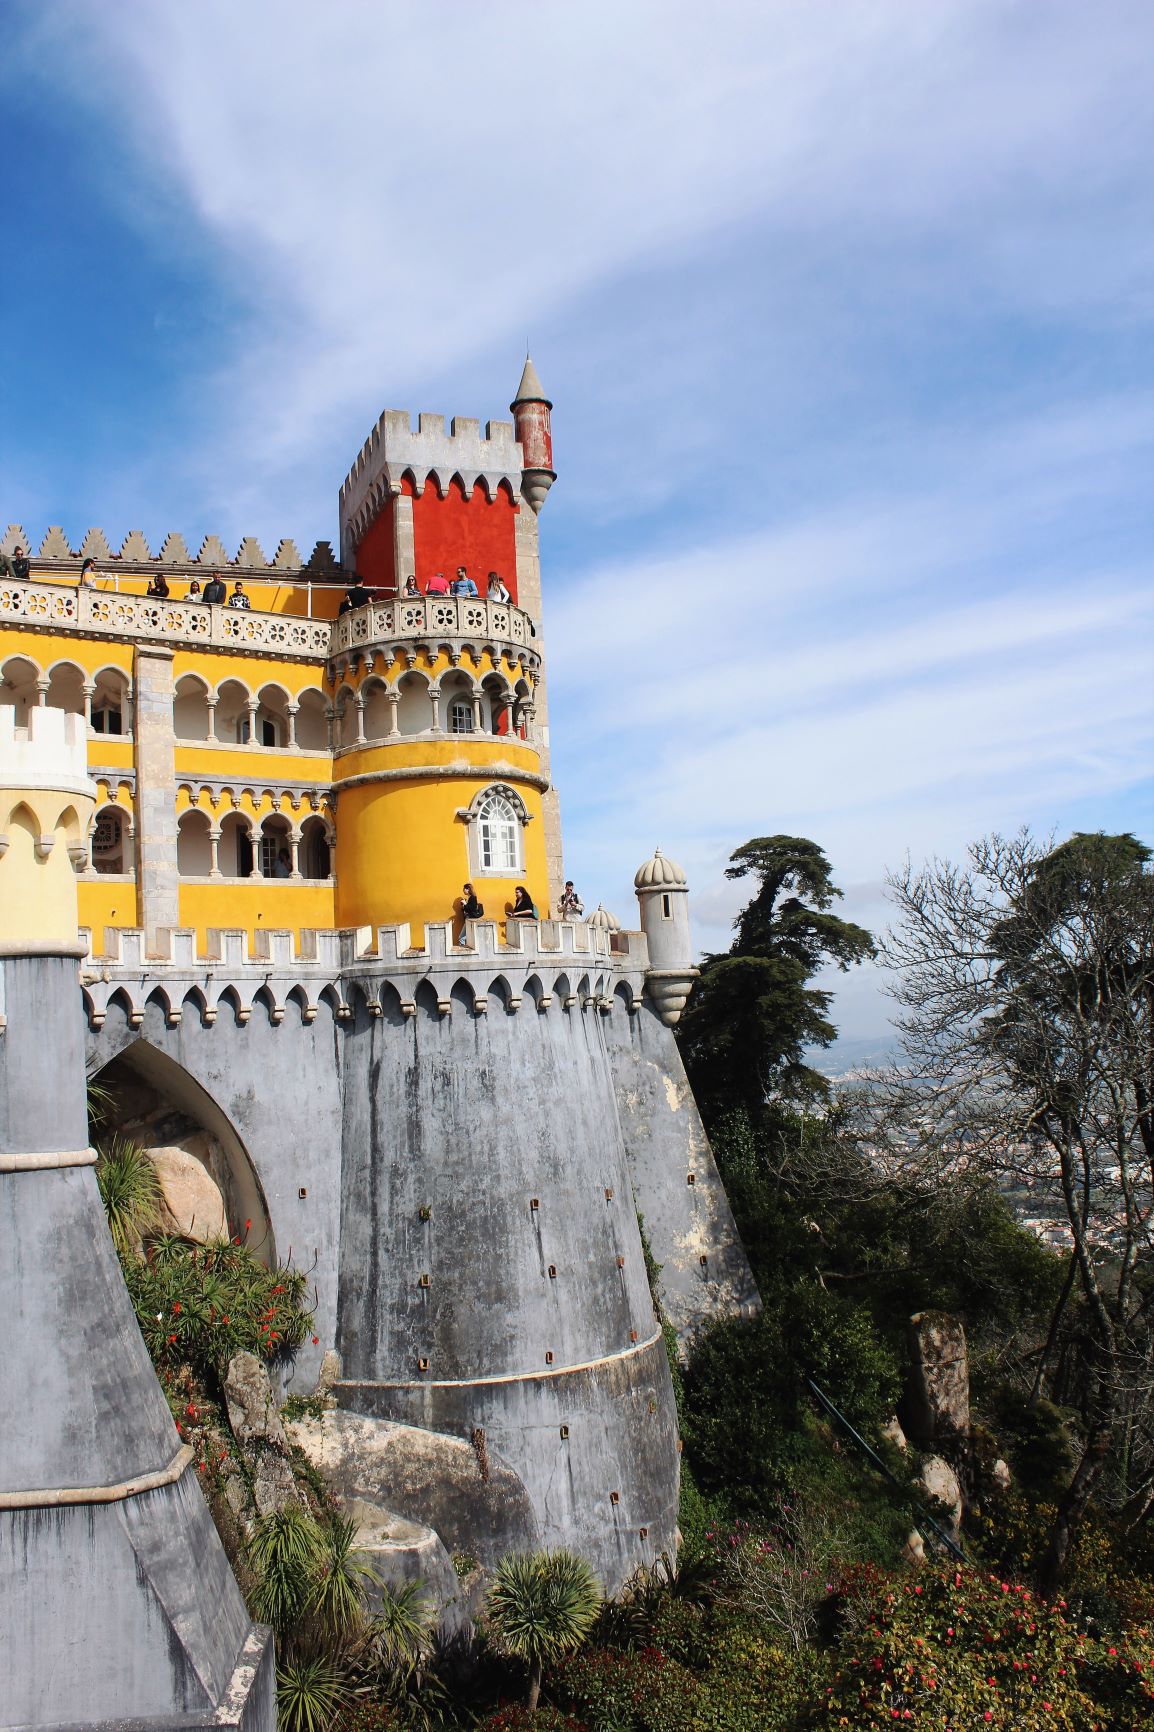 Gray stone with yellow and red tower atPena Palace Sintra